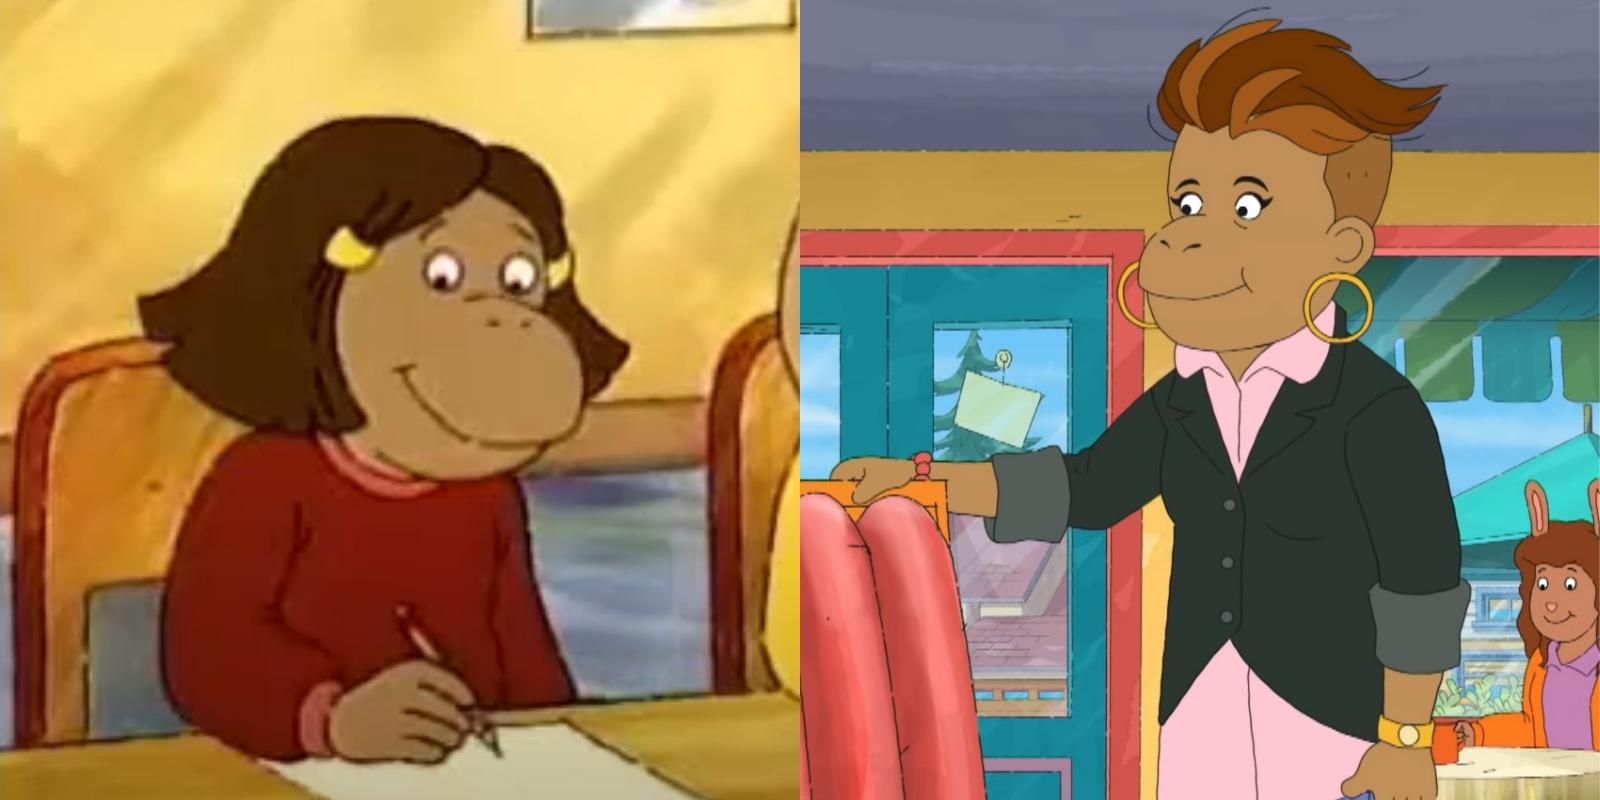 Split image of Francine Frensky as an 8 year old and 28 year old